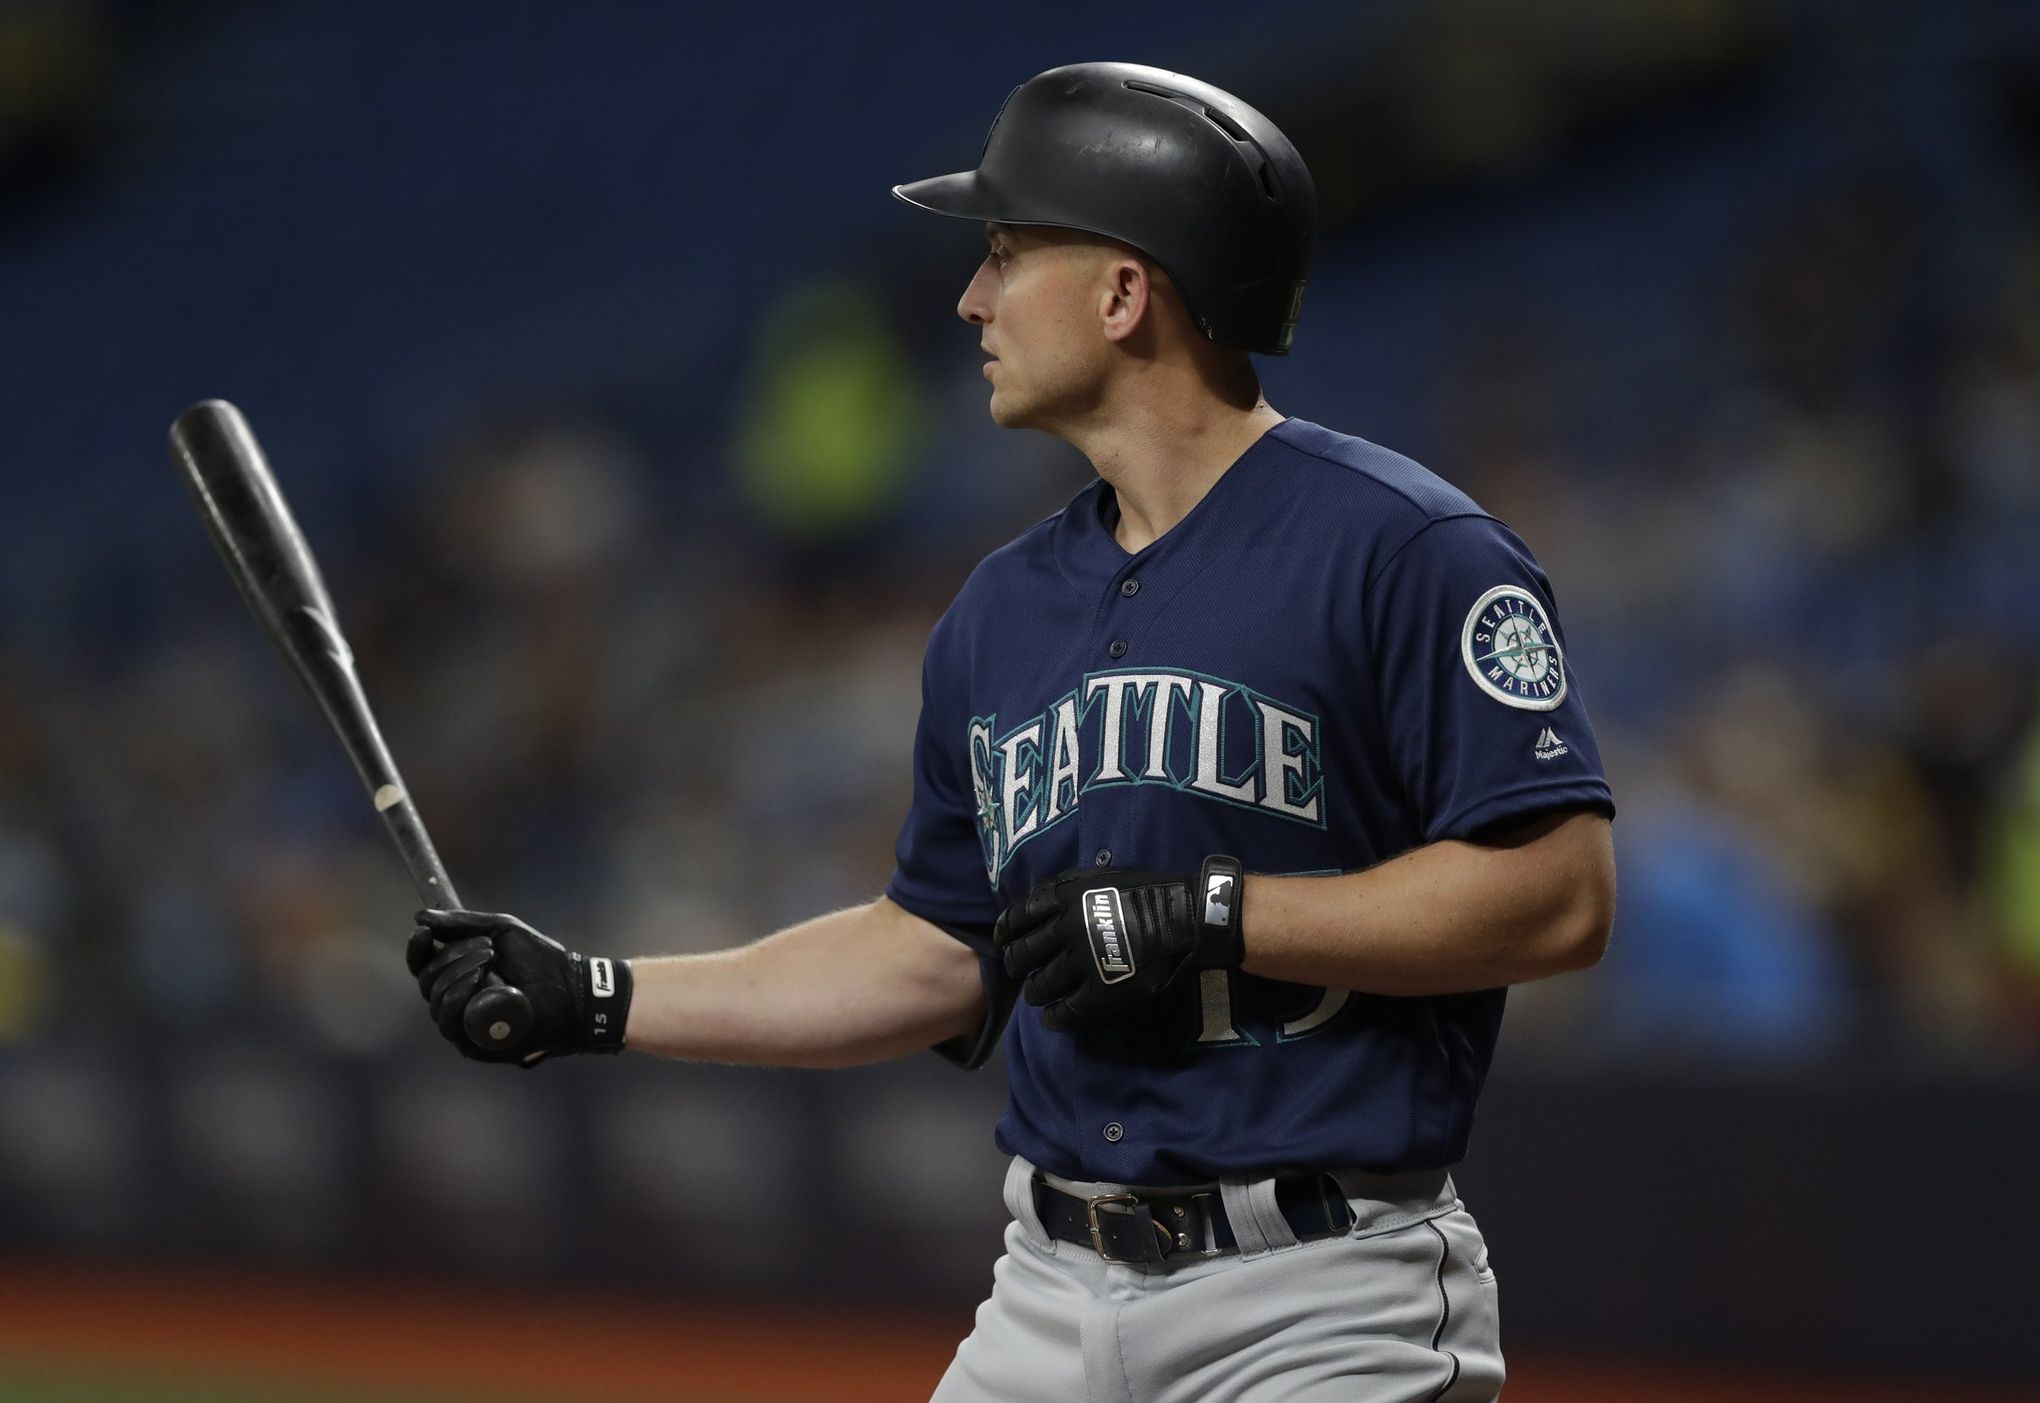 MLB roundup: Seager leads Mariners to victory